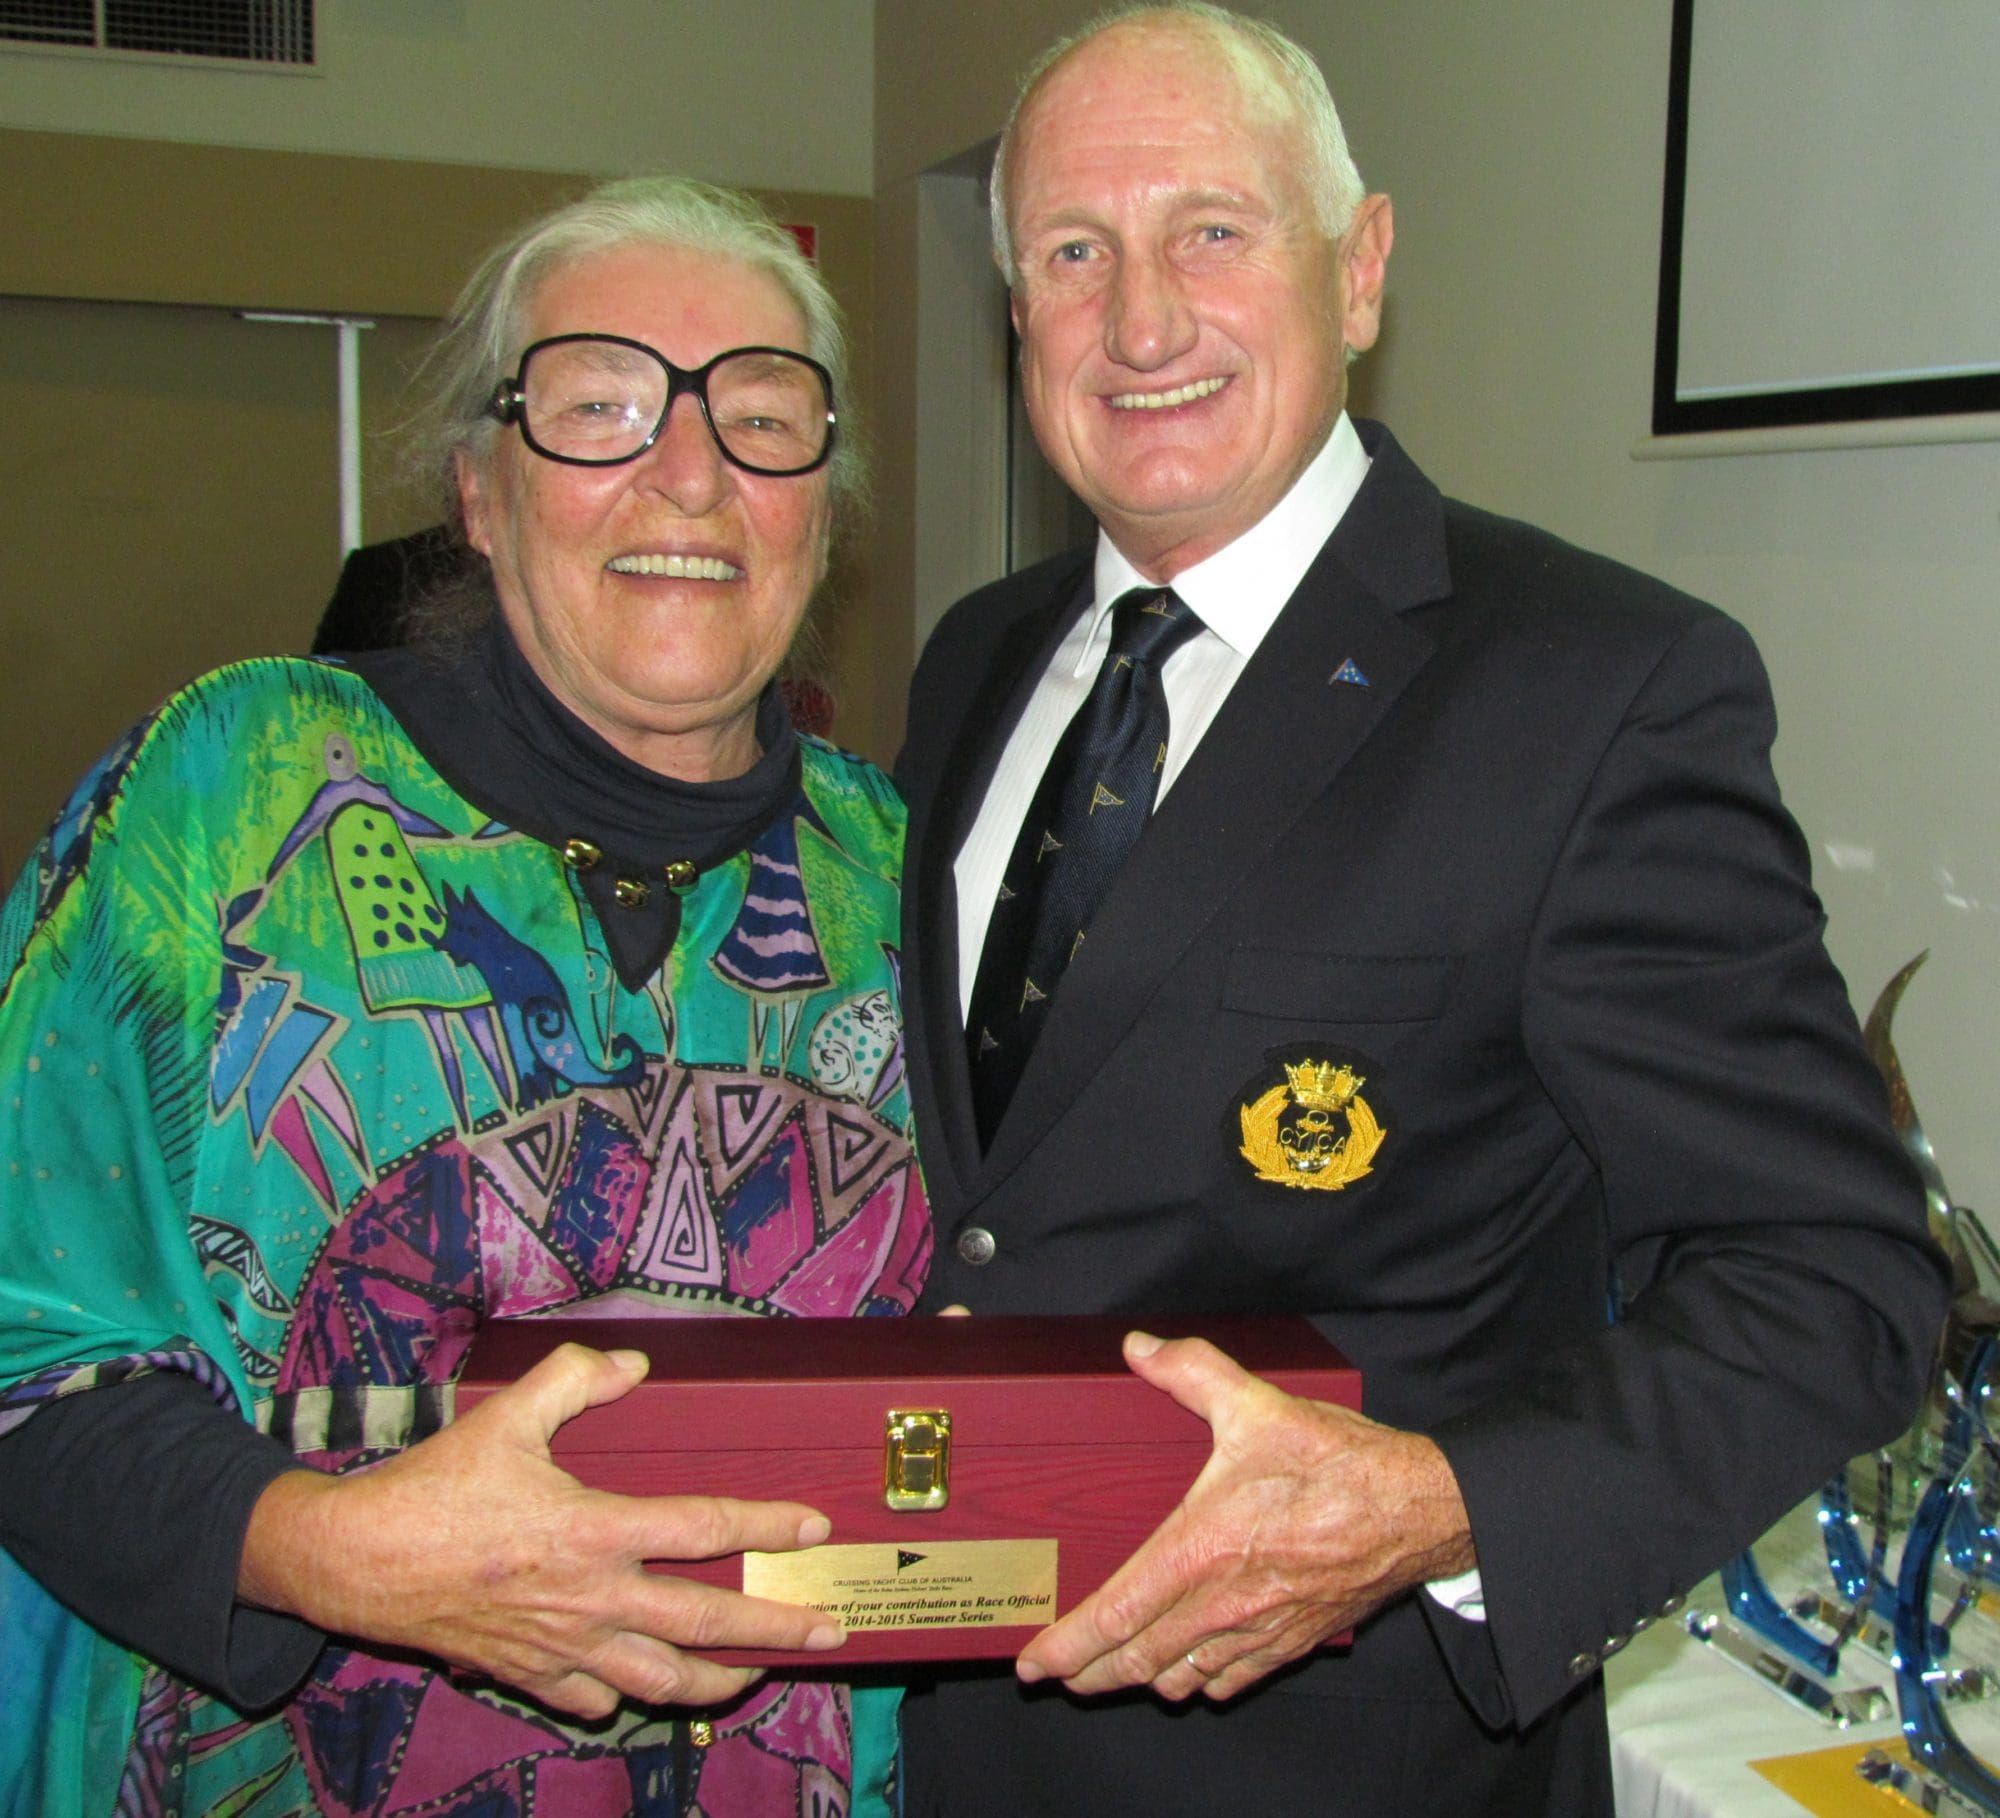 Robyn receives a gift from Commodore Noel Cornish for her contribution as Race Official in the 2014-15 Summer Series.  (L-R) Robyn Morton, Noel Cornish.